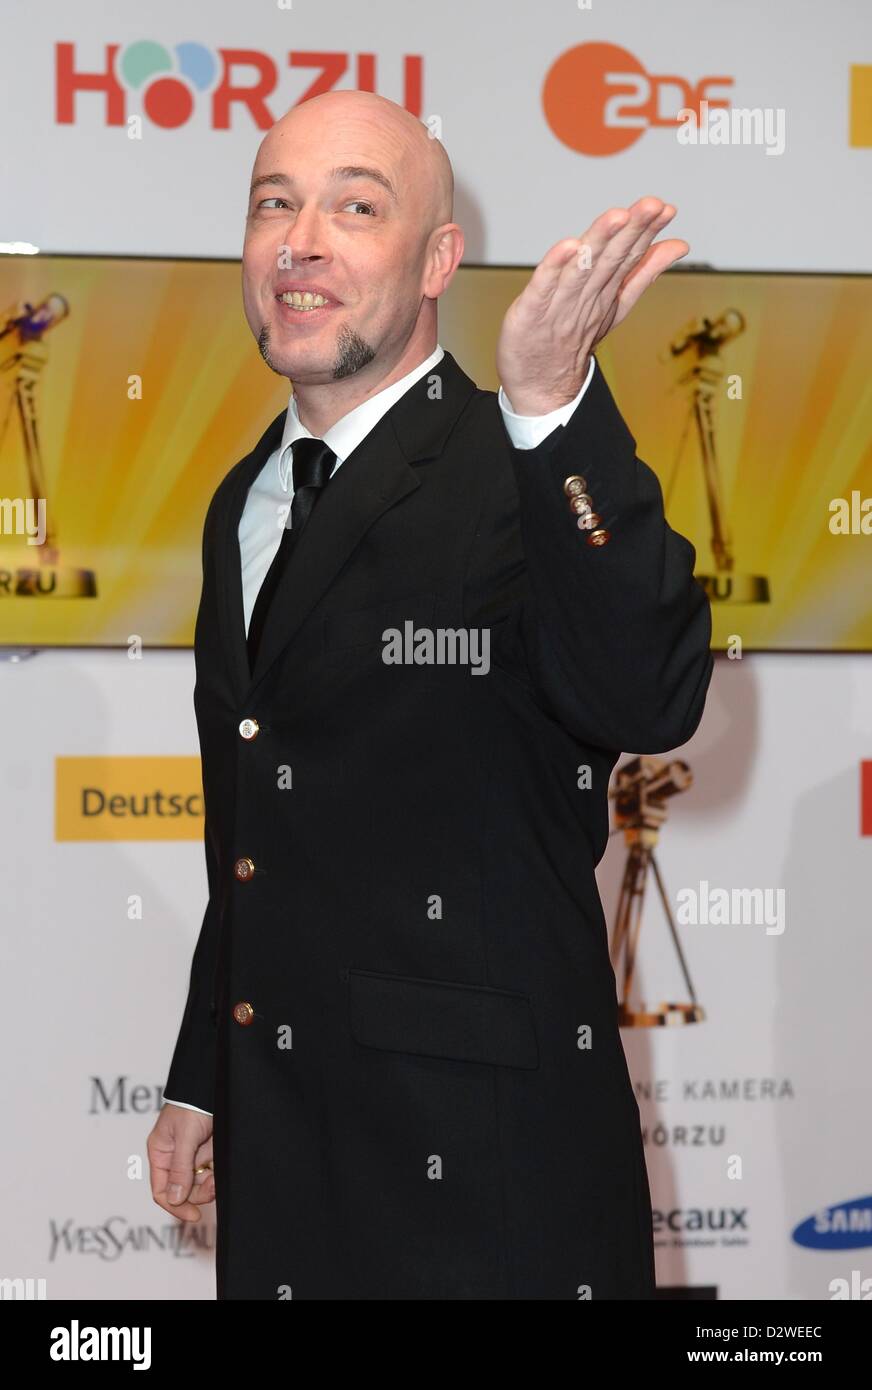 German singer 'Der Graf' from the band 'Unheilig'  arrives for the 48th Golden Camera award ceremony in Berlin, Germany, 2 February 2013. The award honours outstanding achievements in television, film and entertainment. Photo: Britta Pedersen/dpa  +++(c) dpa - Bildfunk+++ Stock Photo